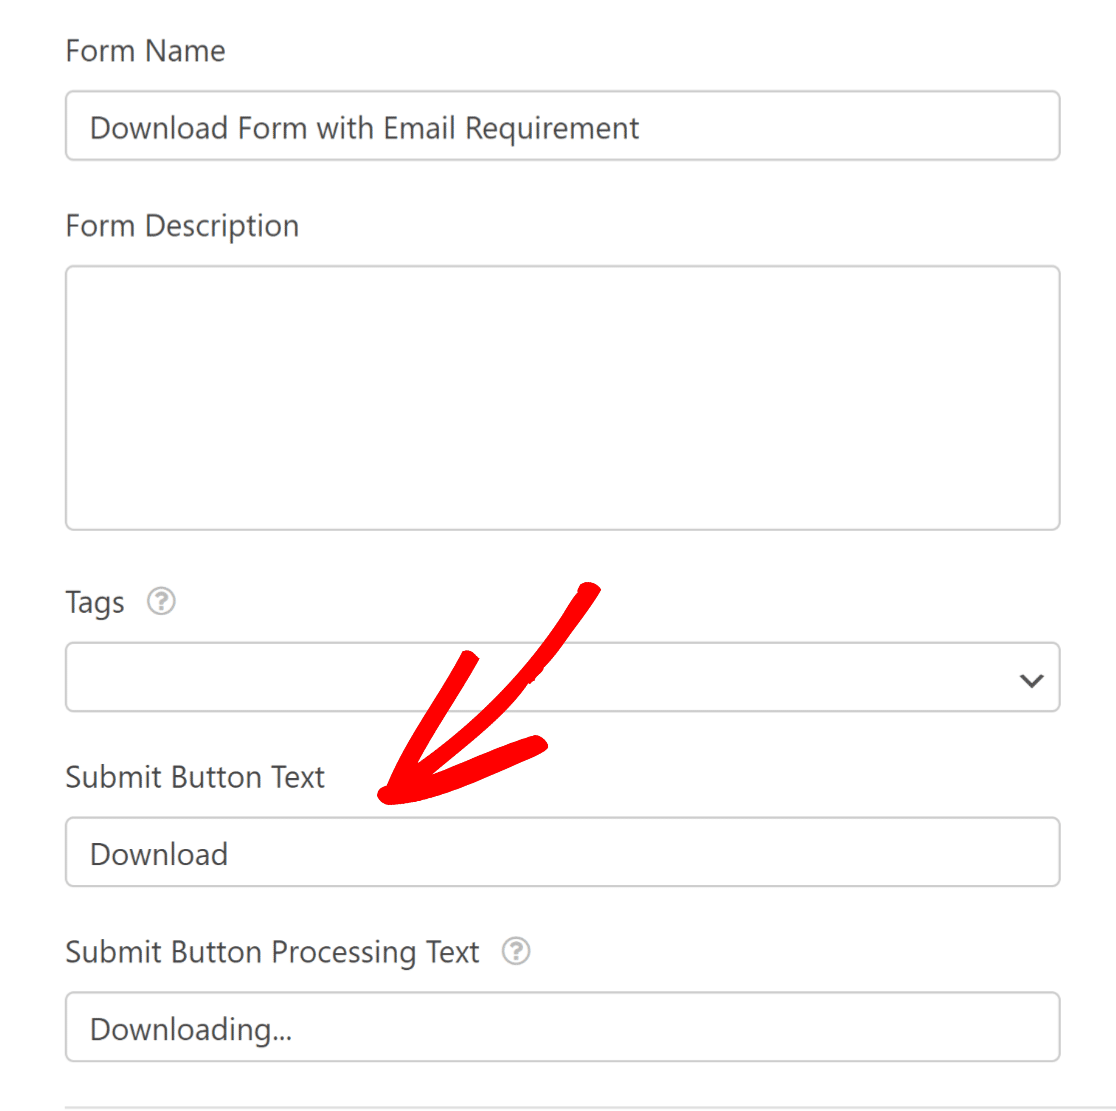 Change submit button text to download